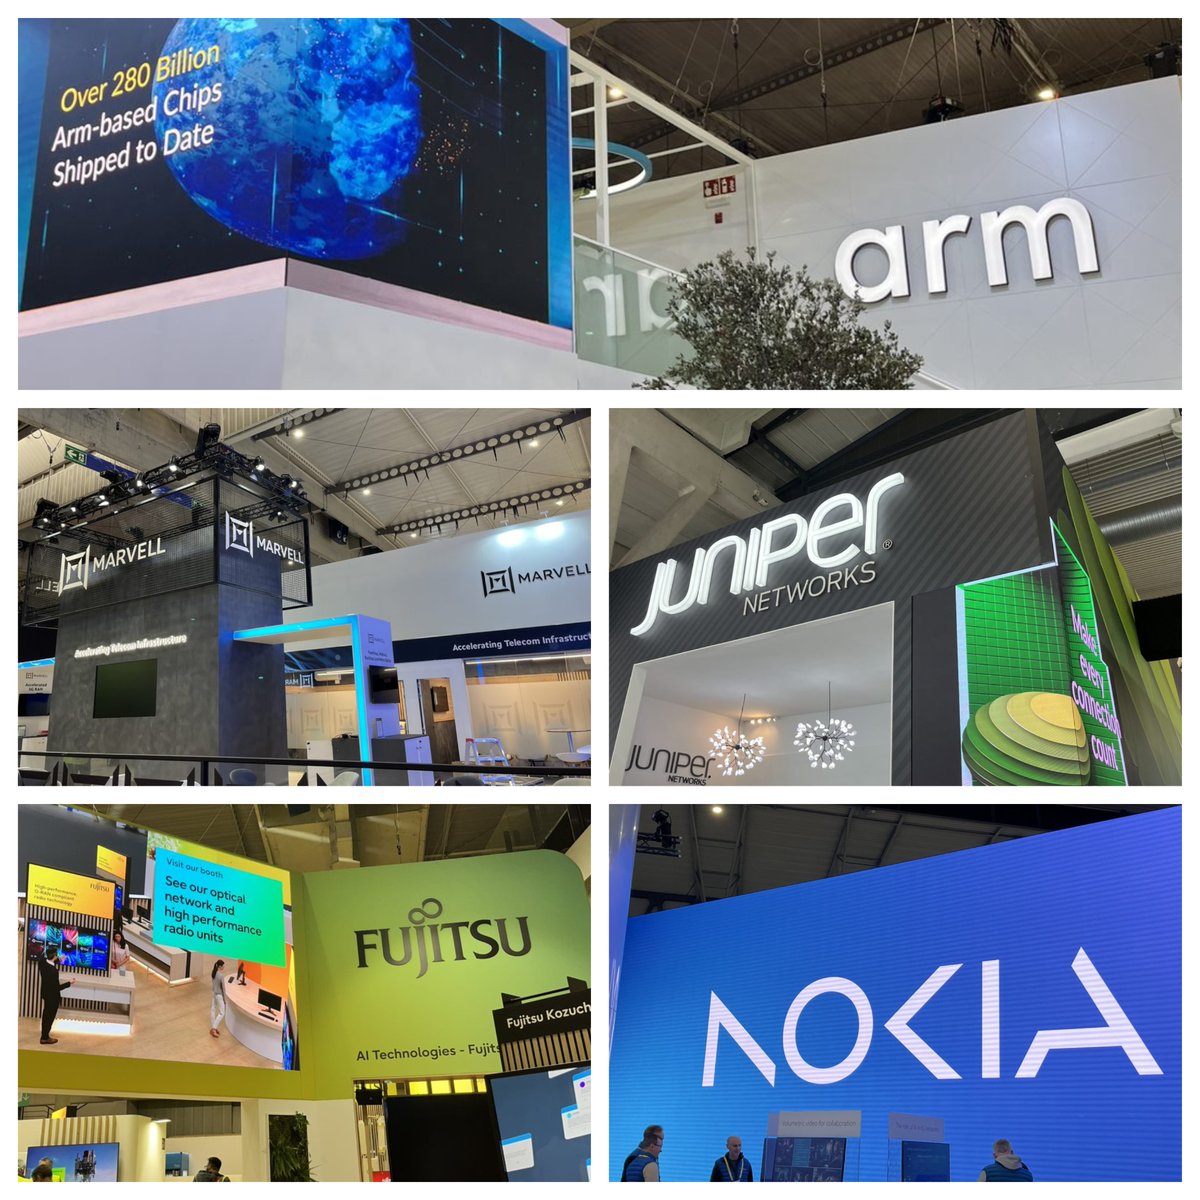 Ecosystem interoperability and diversity...Wind River is proud to work with industry leaders like @Arm, @MarvellTech, @JuniperNetworks, #Fujitsu and #Noka! Visit us at our #MWC24 booth (Hall 2, 2F25) to see demos with these key #telecom players! #WindRiverMWC #OpenRAN #5G